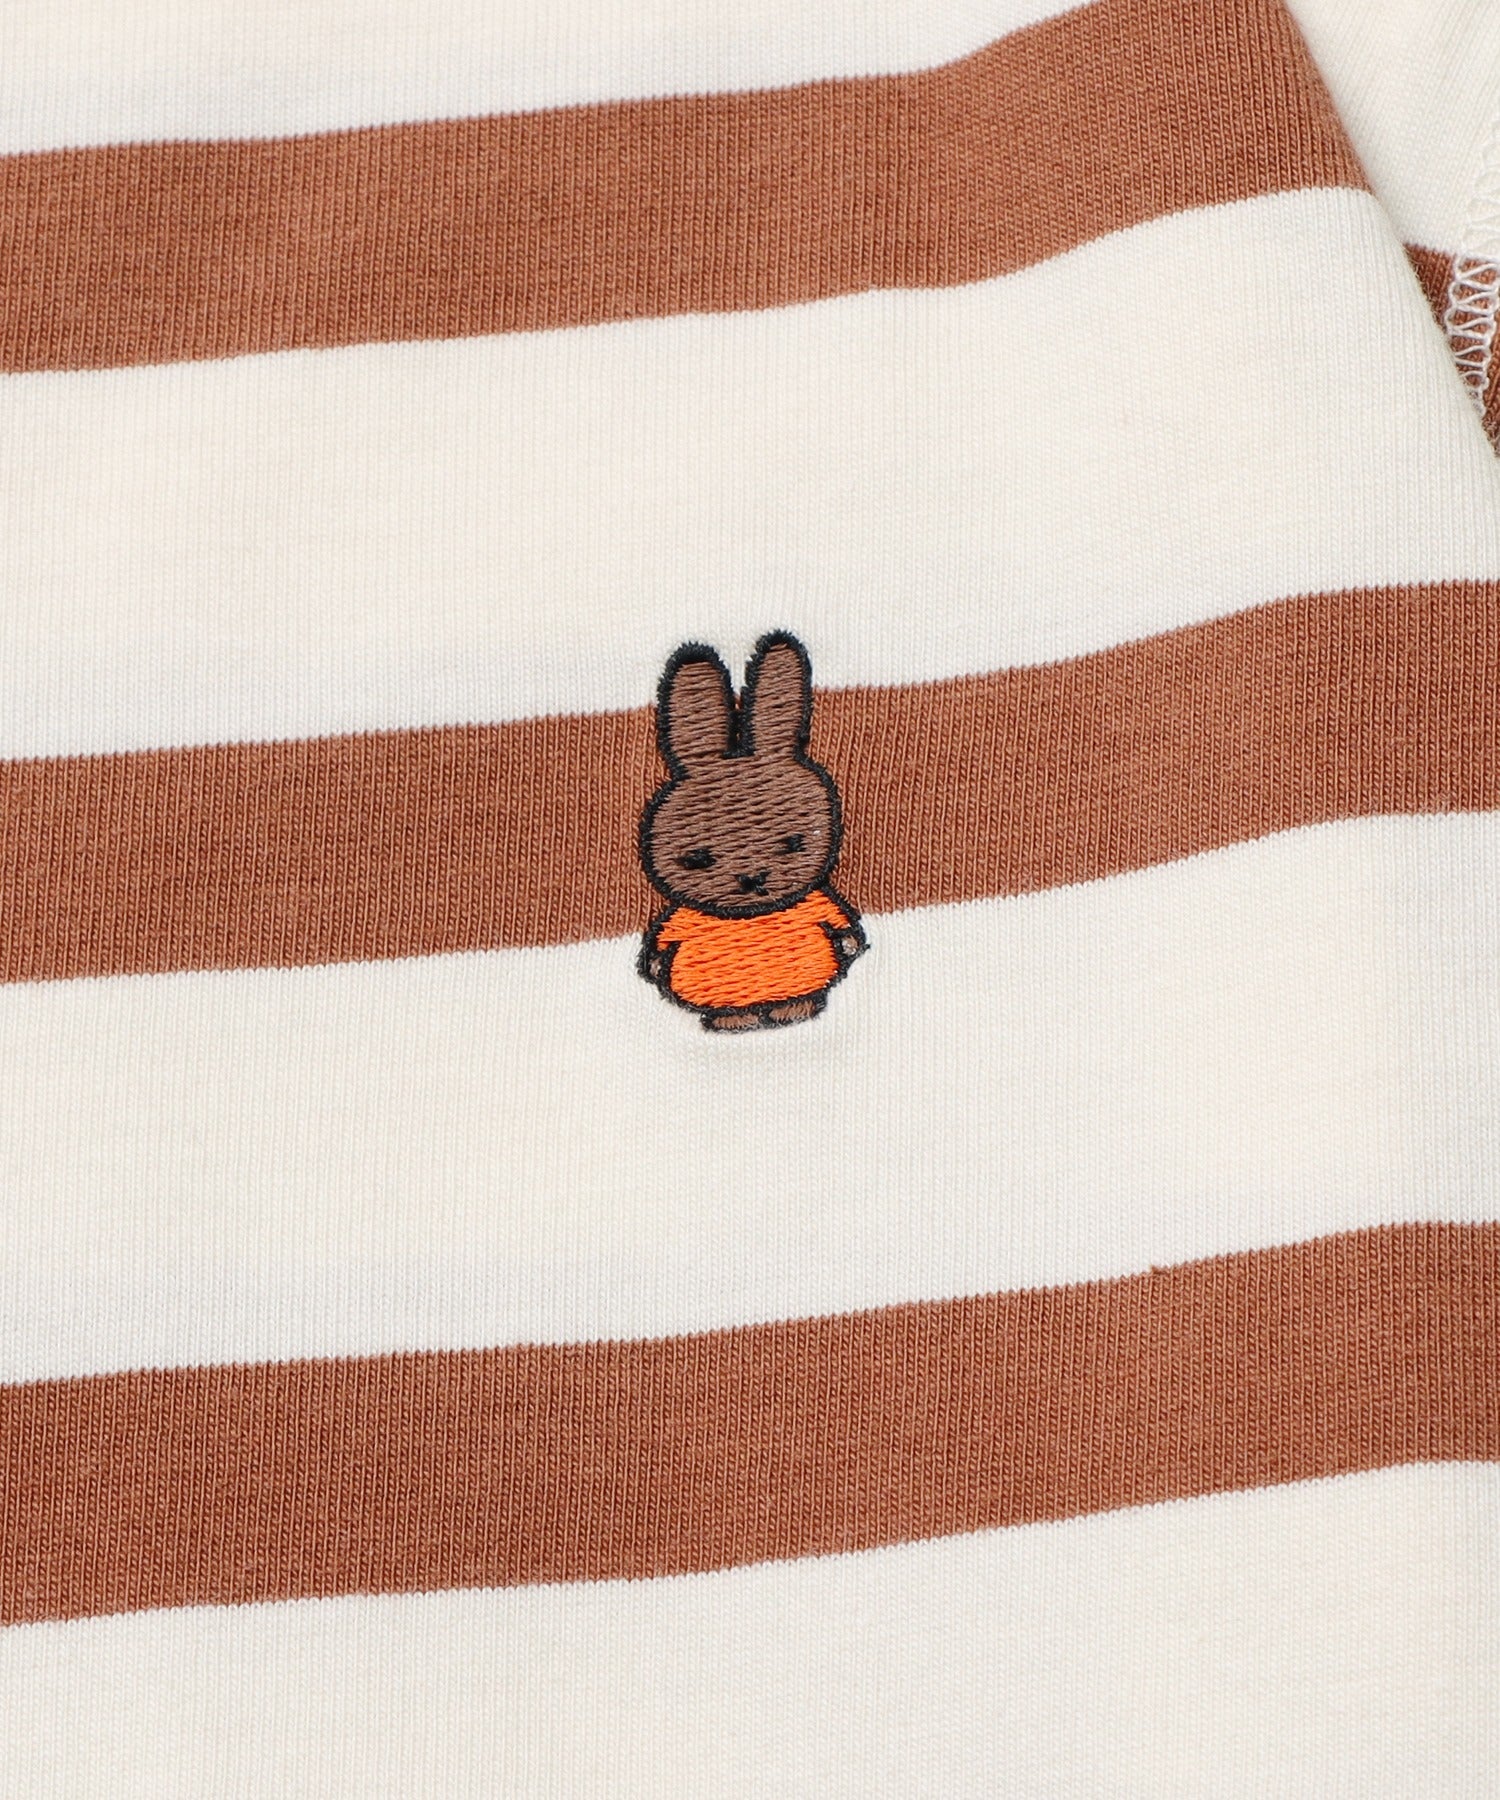 POP×miffy embroidered striped longsleeve t-shirt